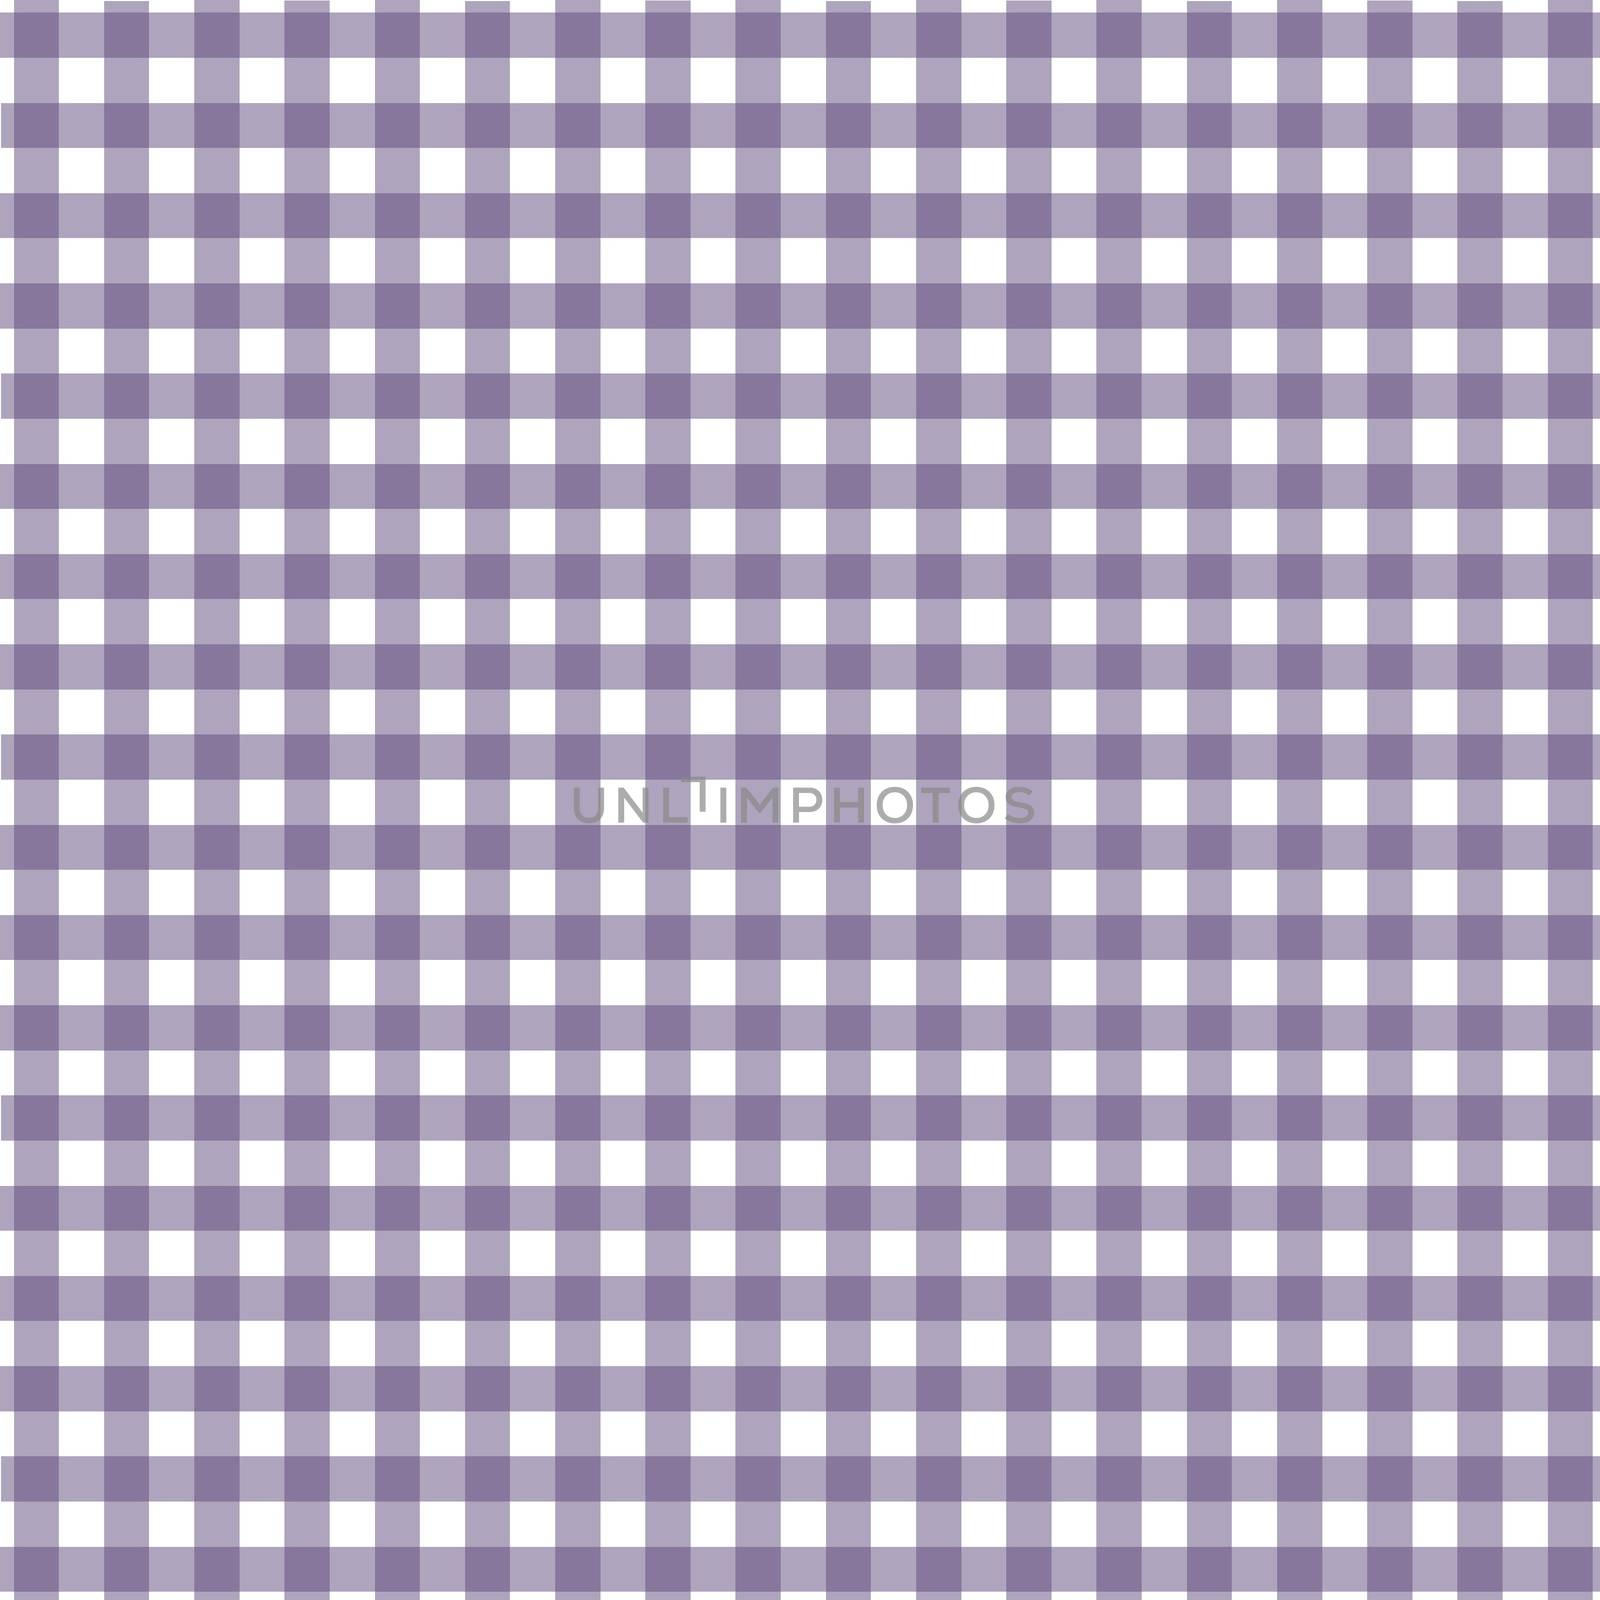 Violet and white tablecloth pattern in square shape